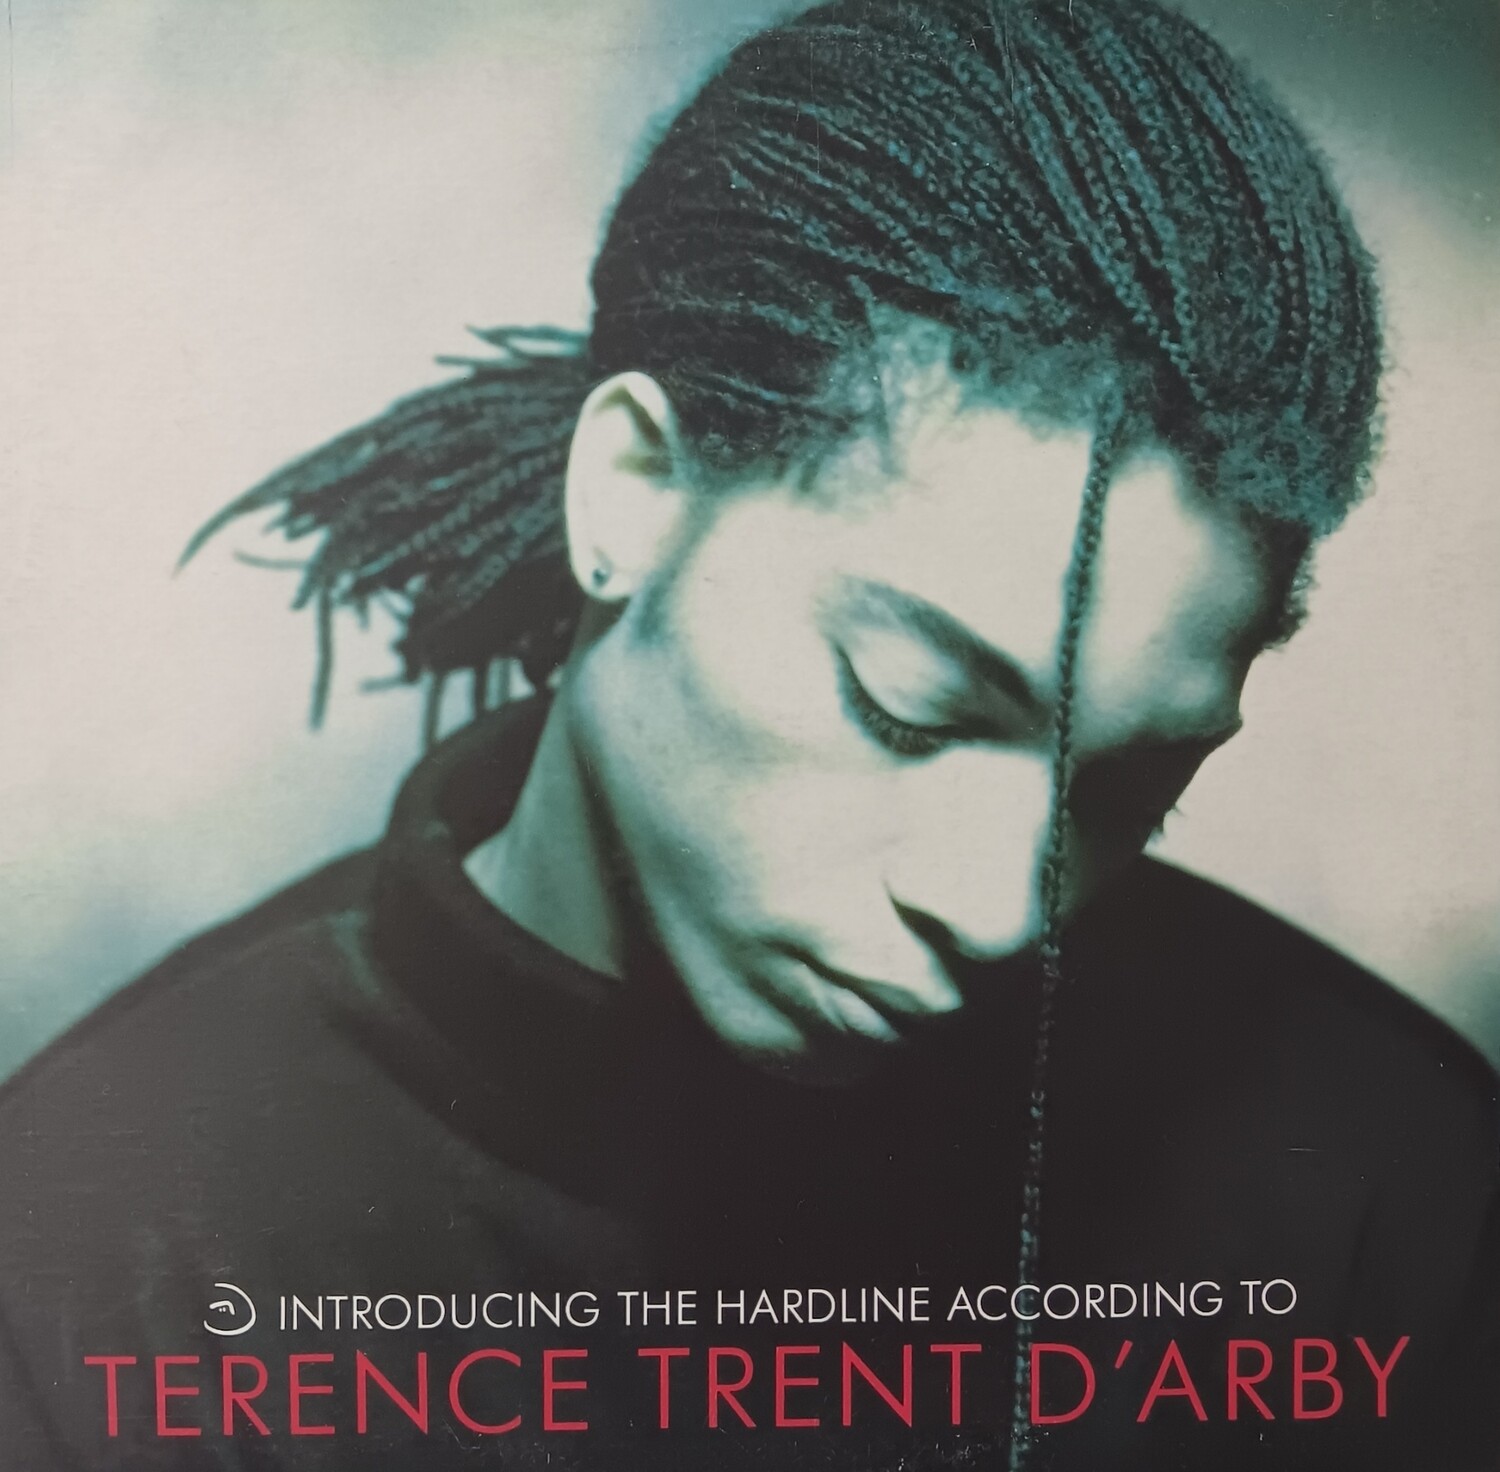 Terence Trent D'arby - Introducing the hardline